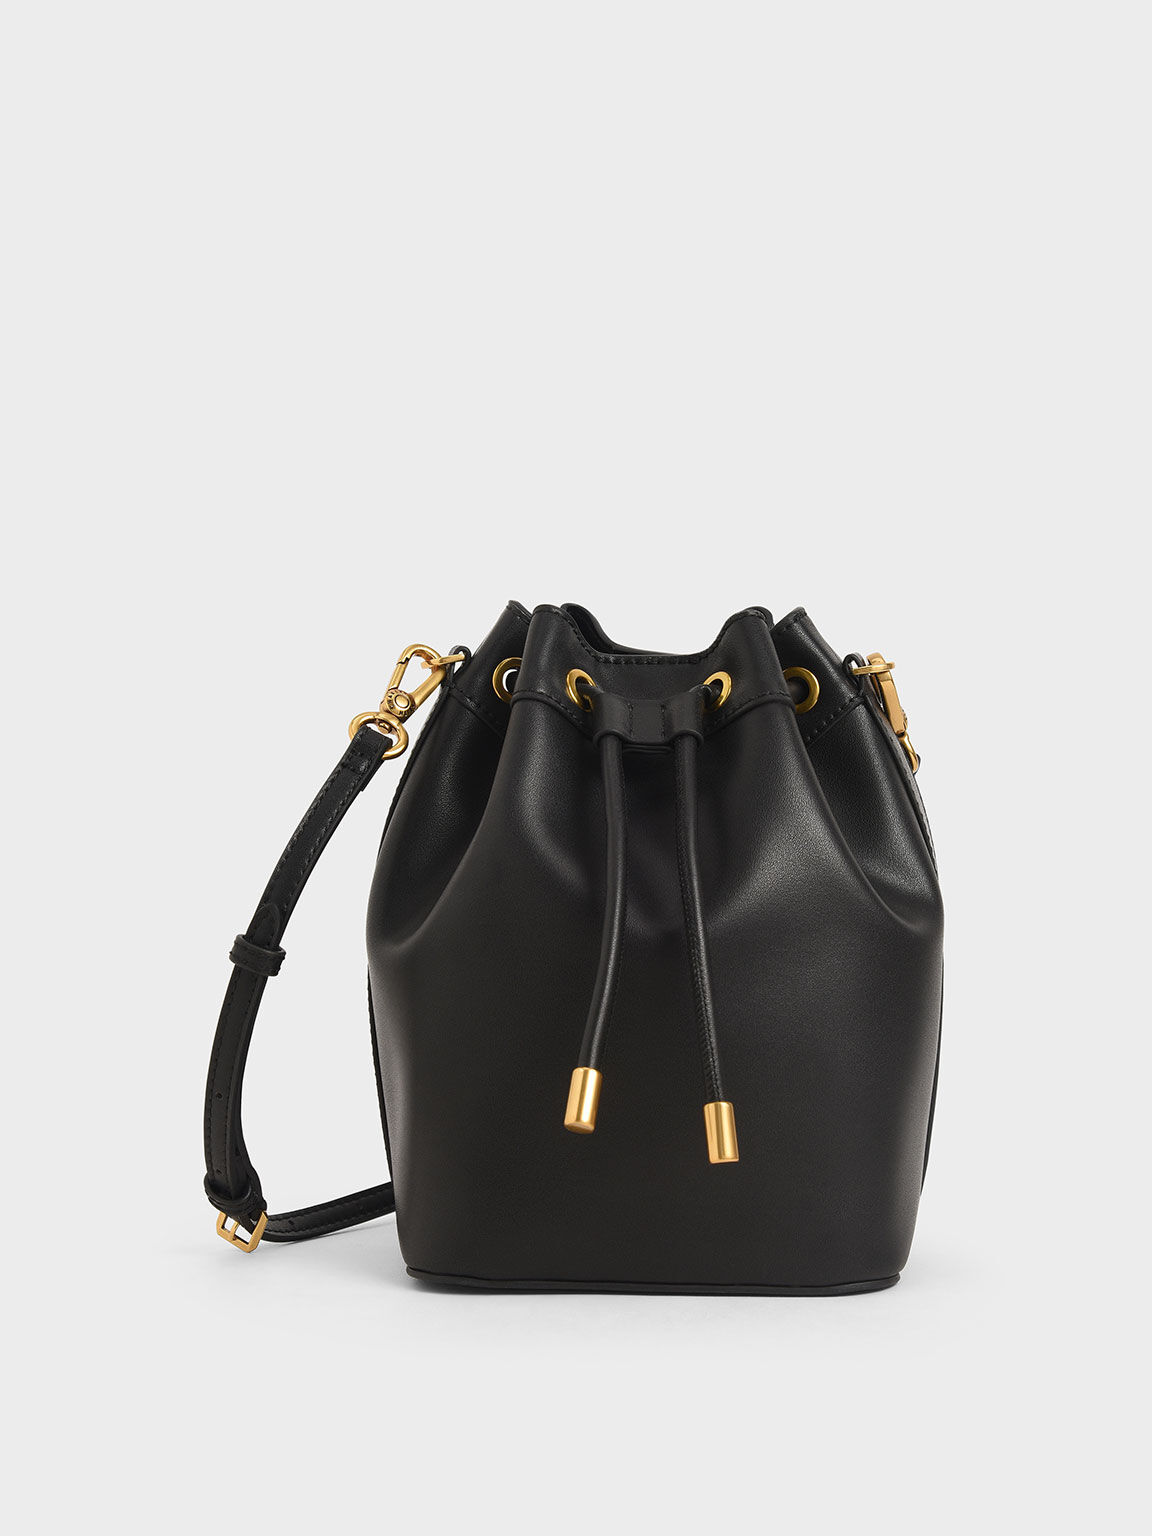 Buy online Charles & Keith Handbags from bags for Women by Shoes